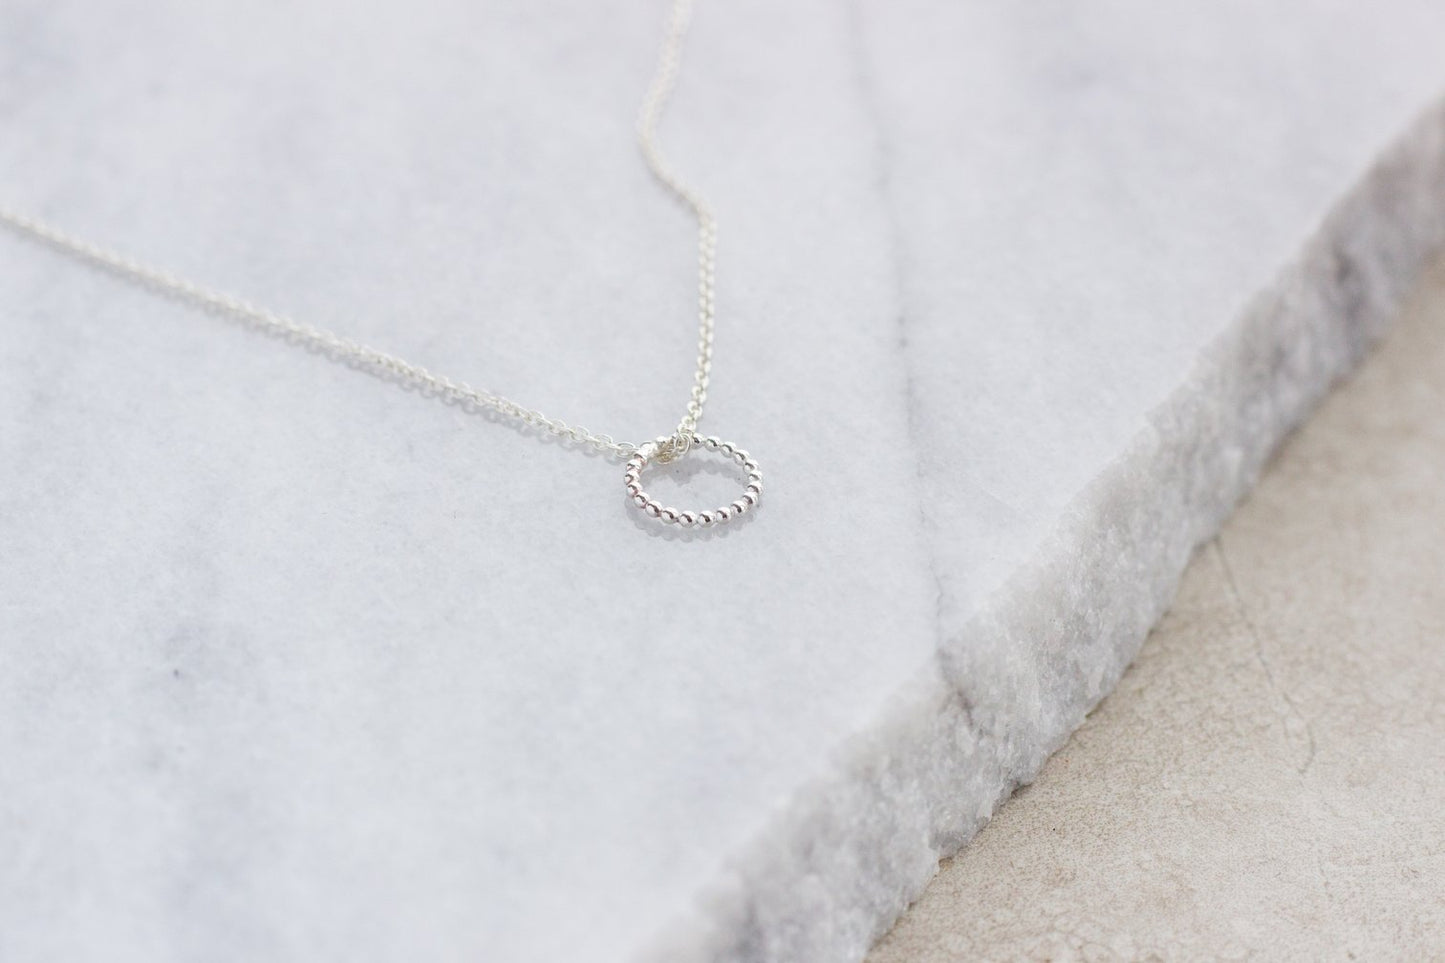 Delicate Dot Necklace